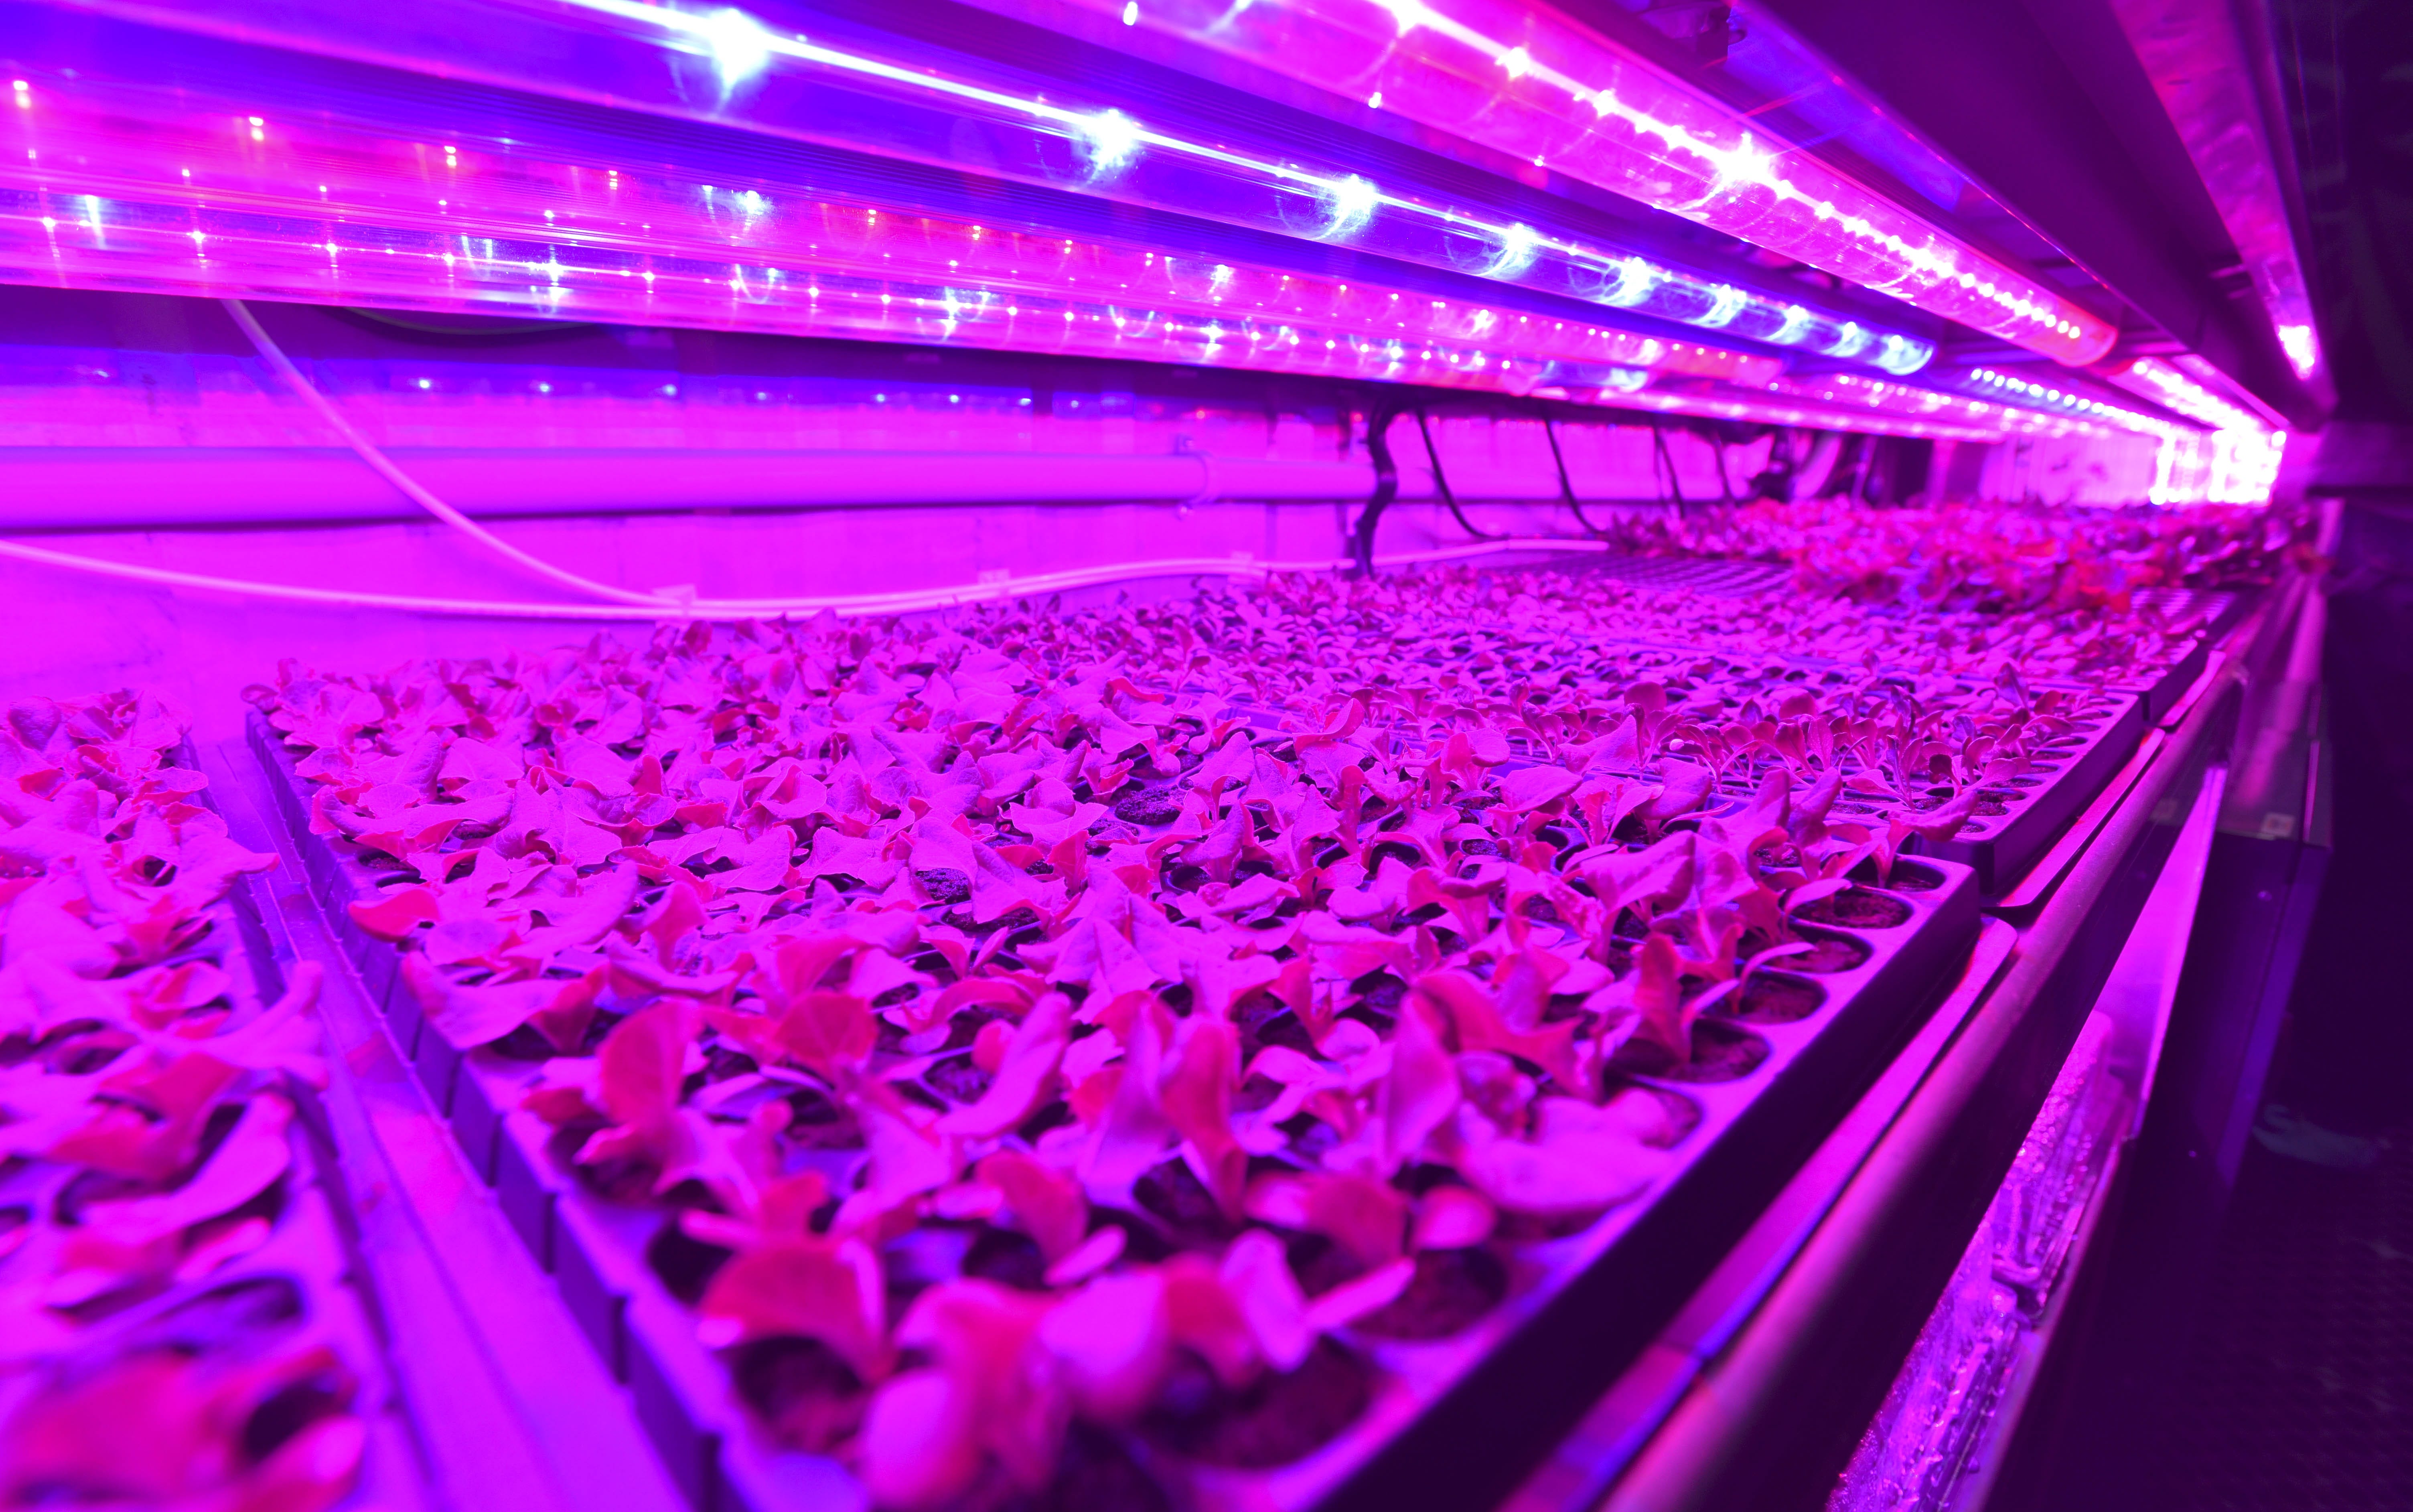 Lettuce seedlings grow under grow lights in seedling troughs in a shipping container at Cass Community Social Services on Wednesday.